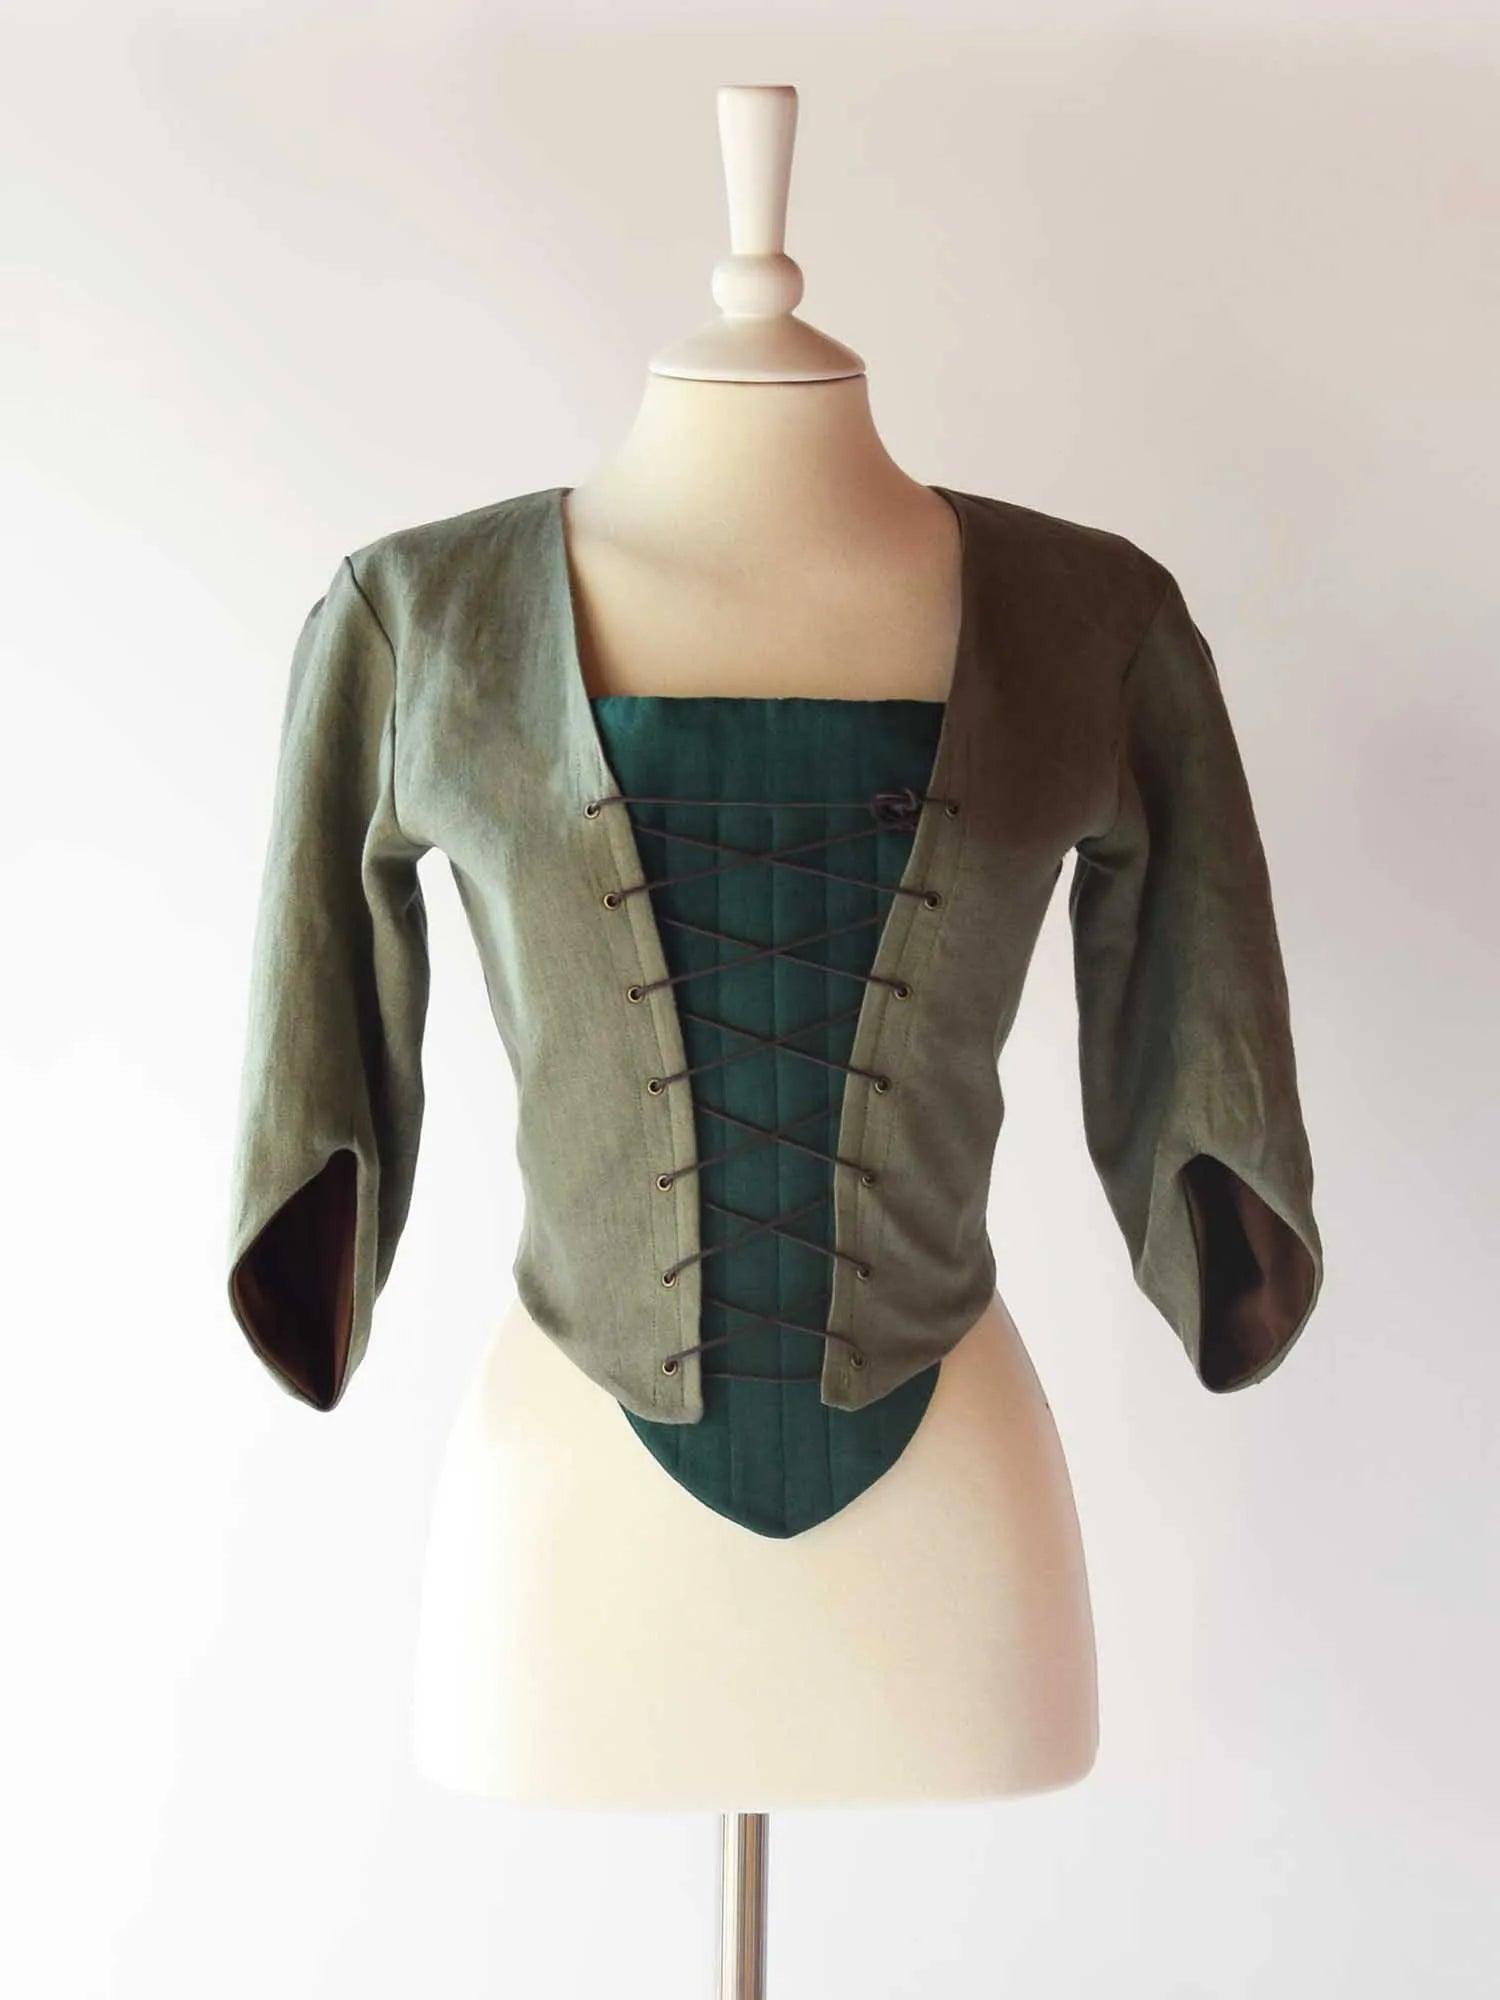 Lace-Up Bodice in Sage Green Linen - Atelier Serraspina